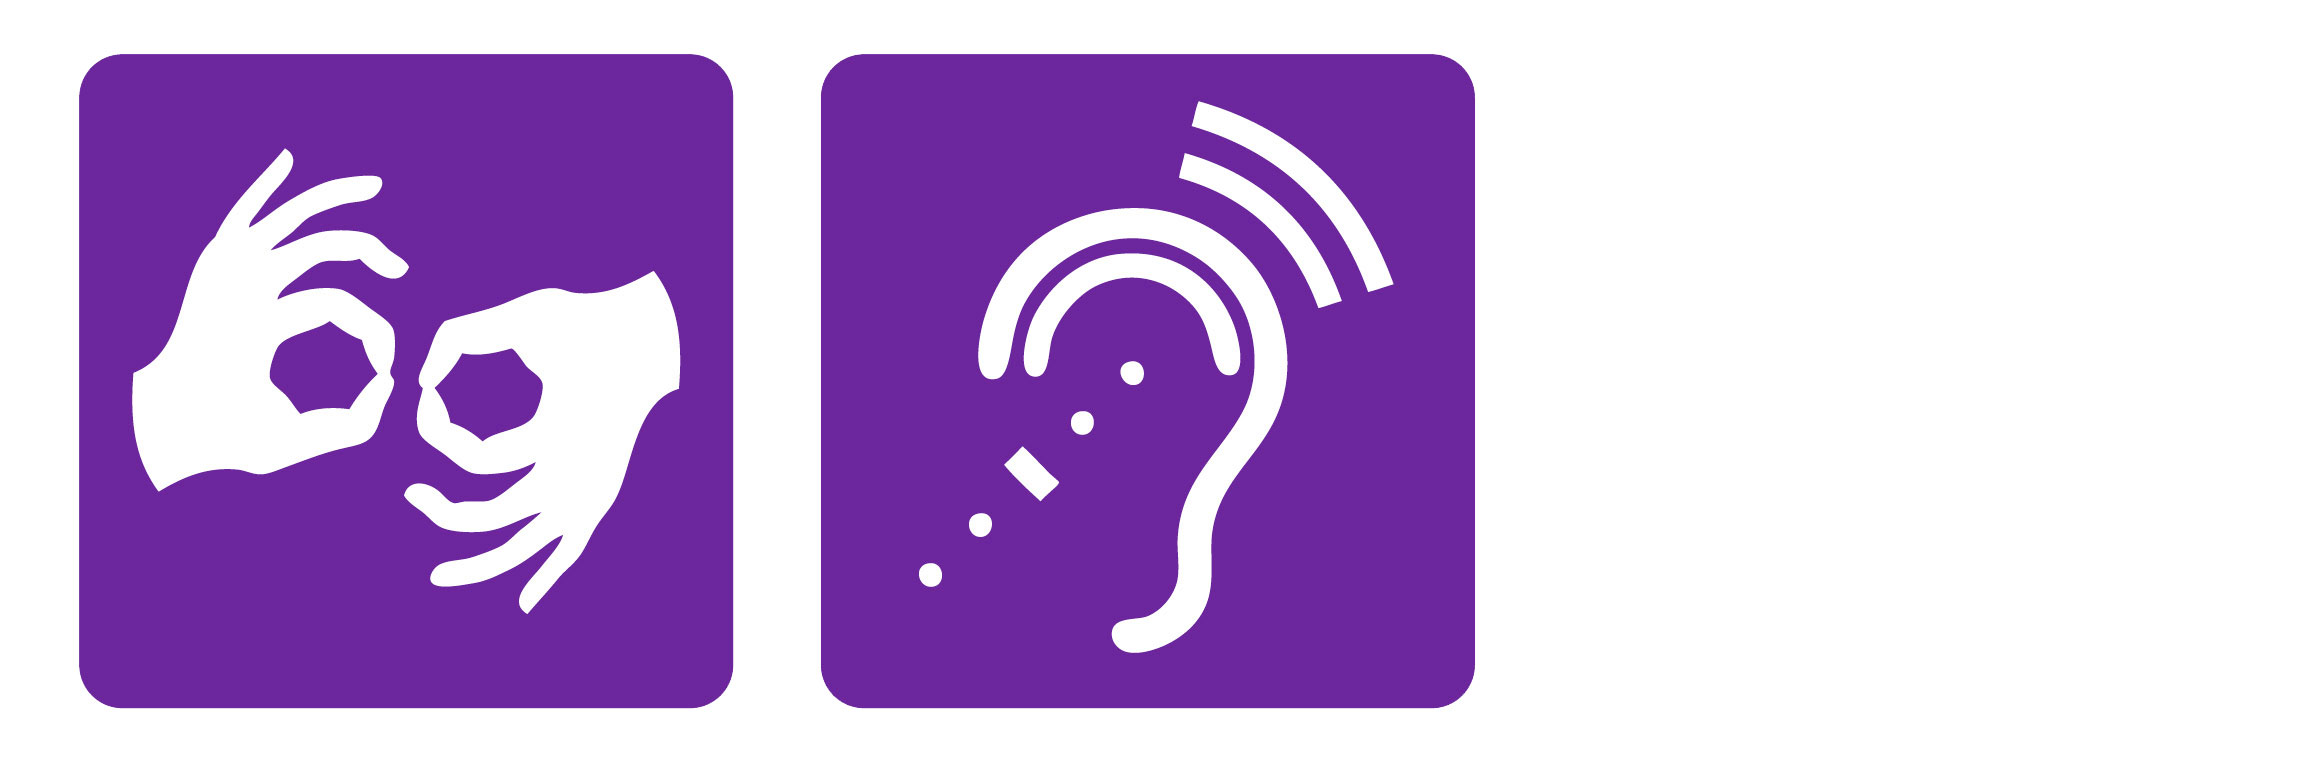 Services for the Deaf and Hard of Hearing Icons